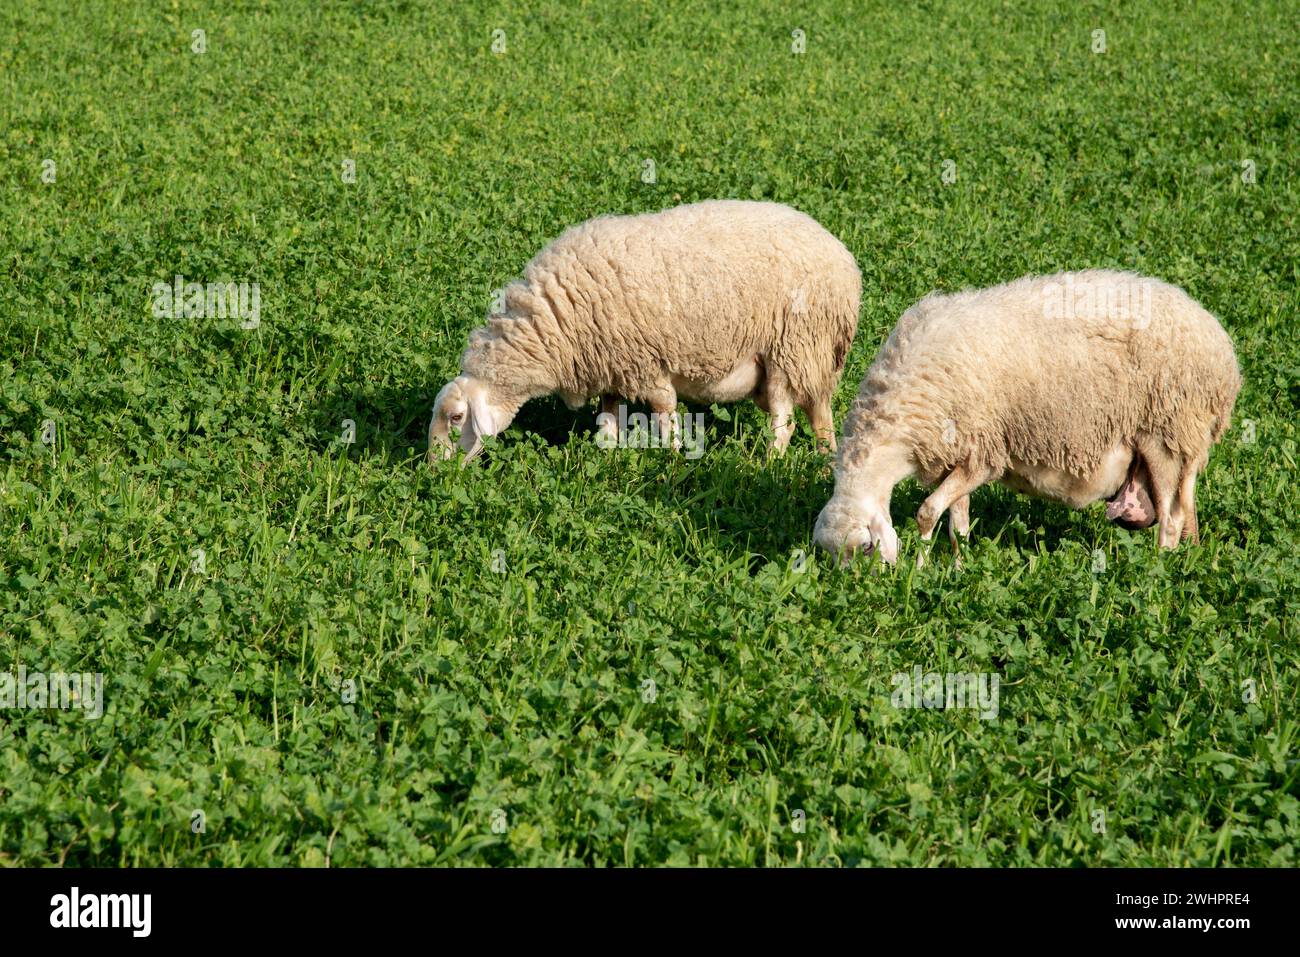 Sheep domestic animals feeding outdoor with grass. Agriculture farmland Stock Photo